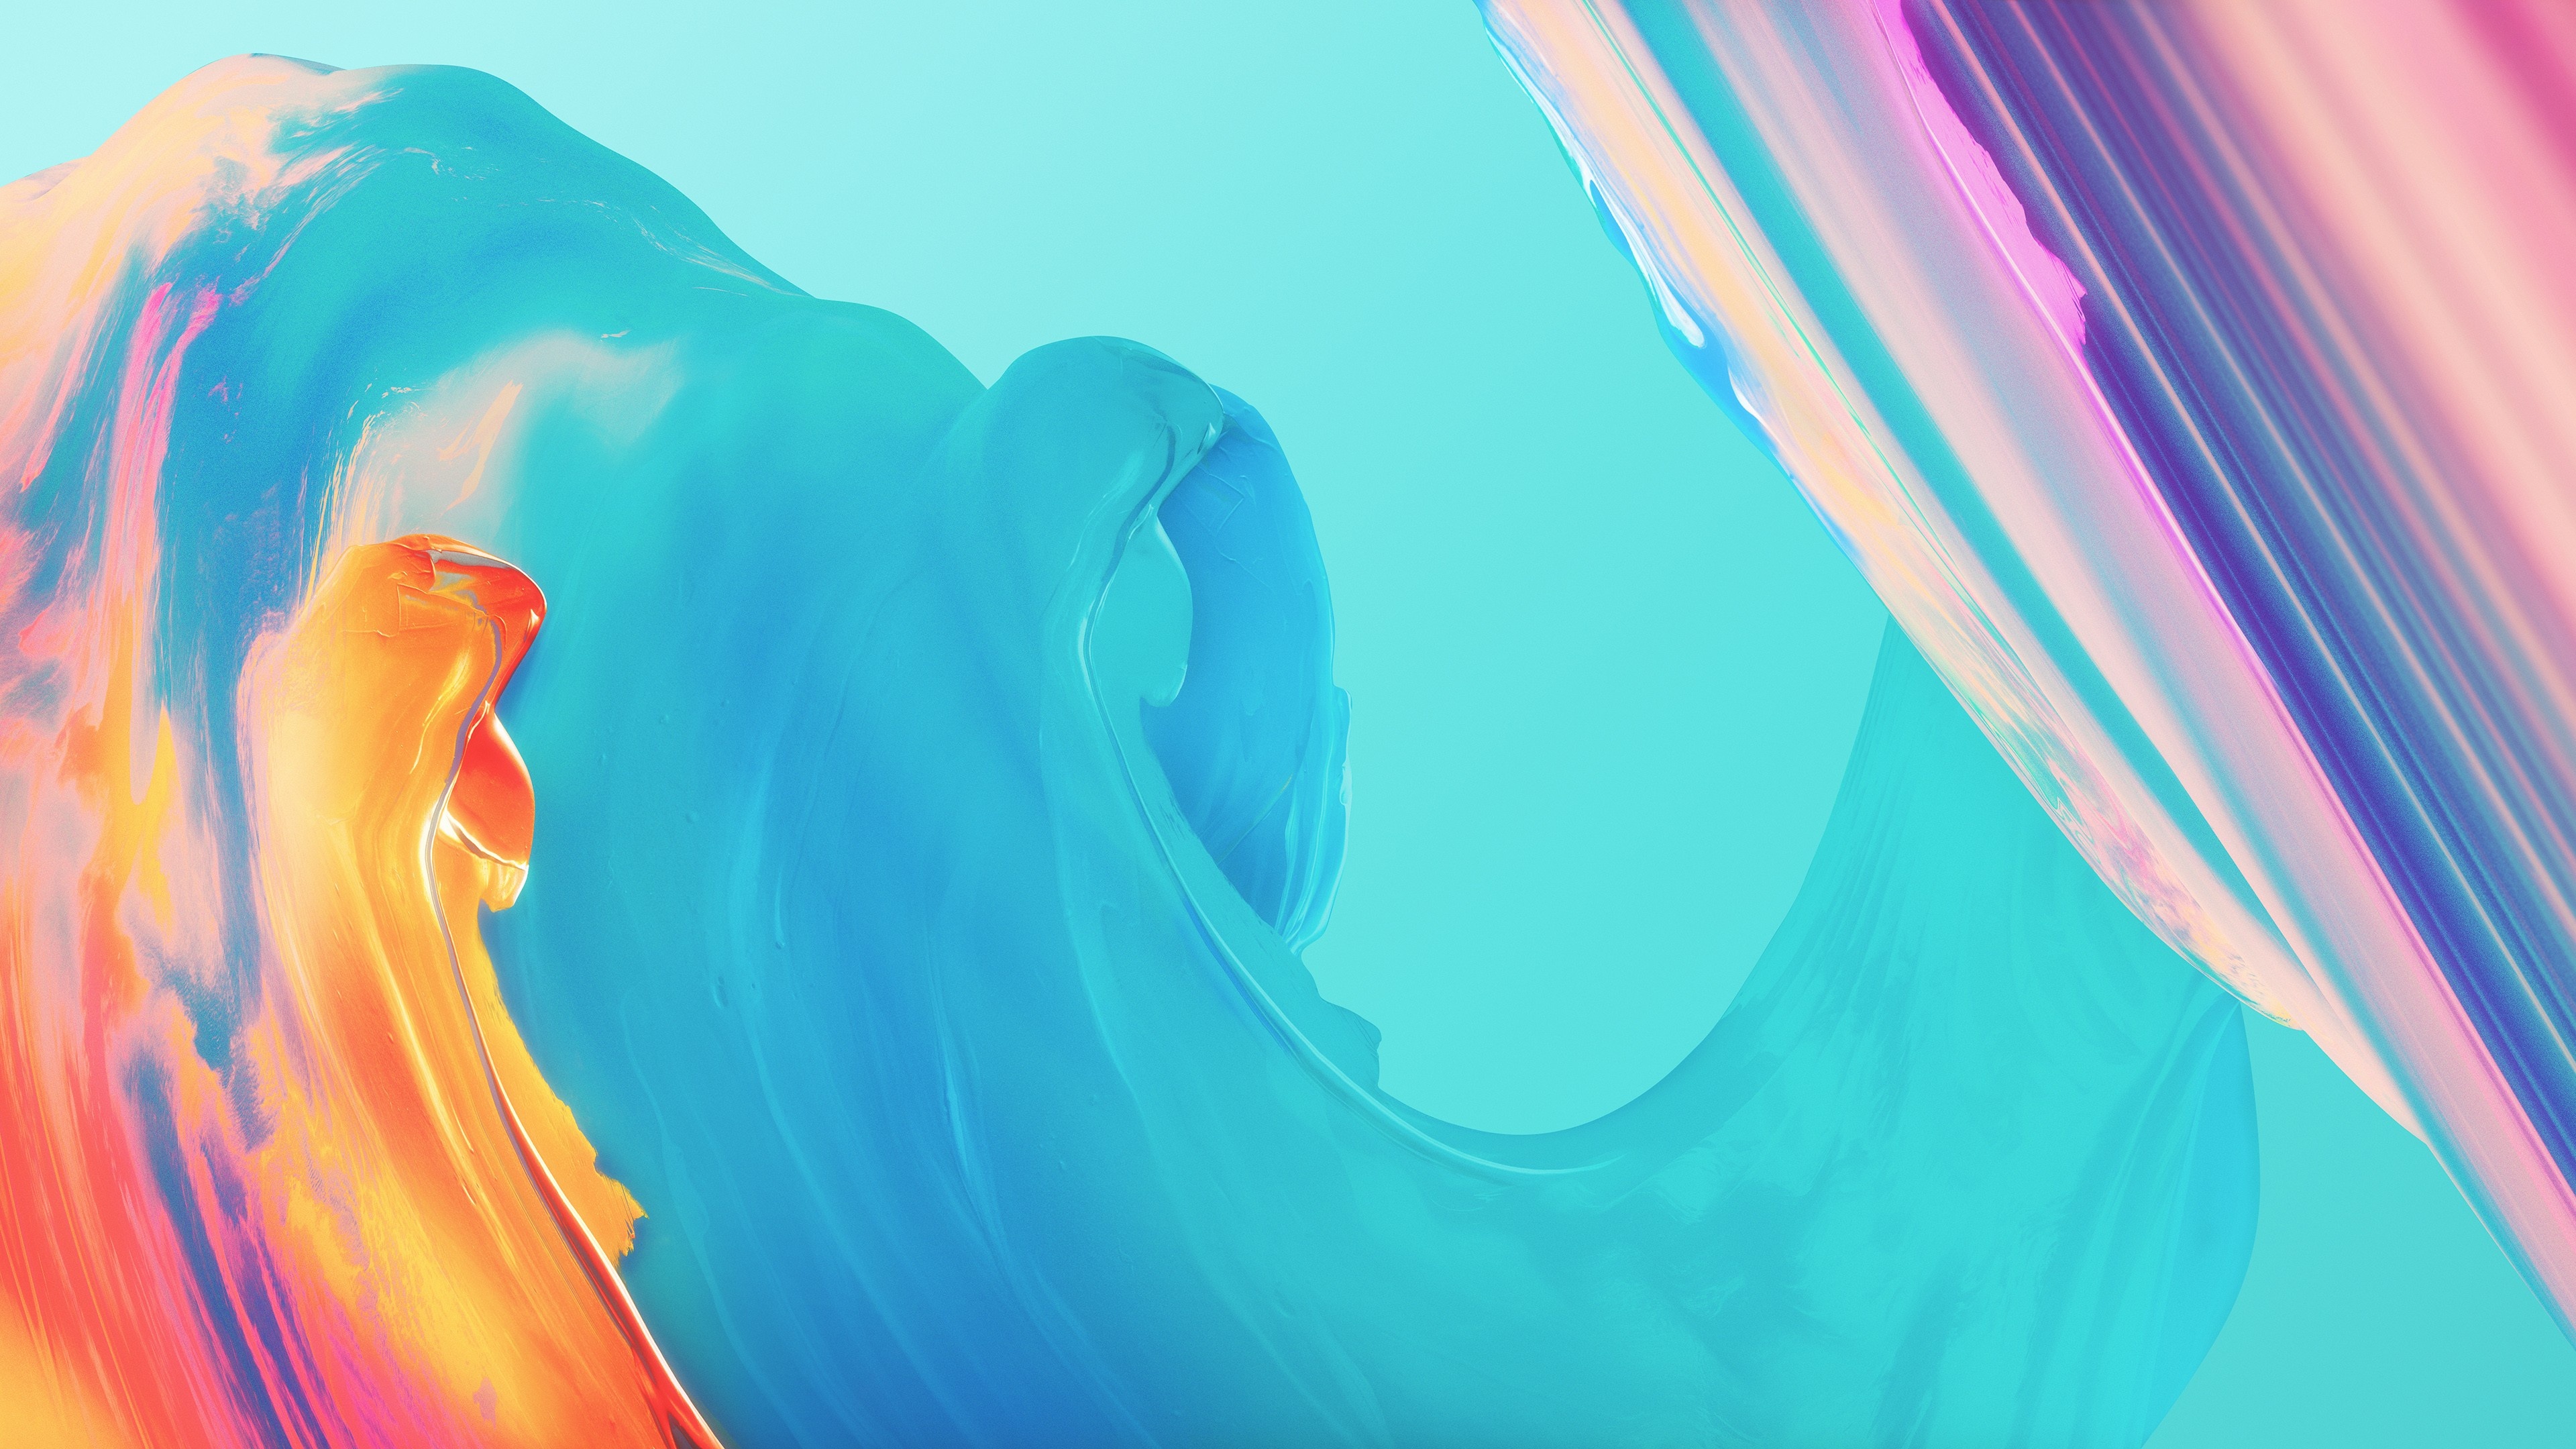 Abstract paint, 4K Ultra HD, Colorful background, Visual art, 3840x2160 4K Desktop